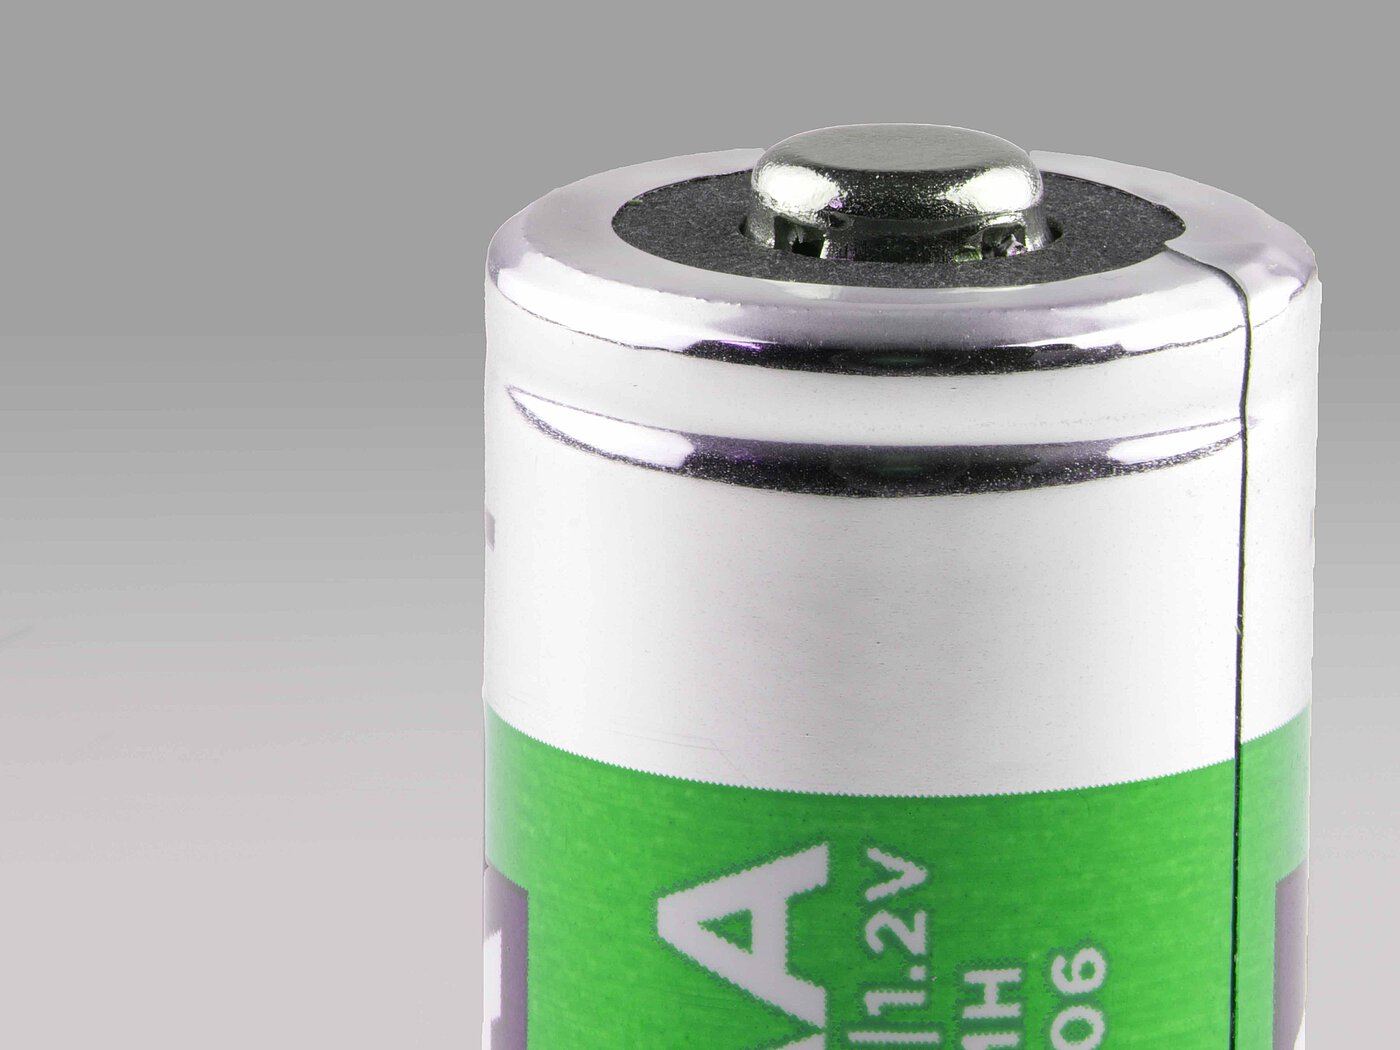 the silvery shining anode and the upper, greenish-metallic half of a rechargeable battery of standard size AAA as a close-up fotography on a grey background